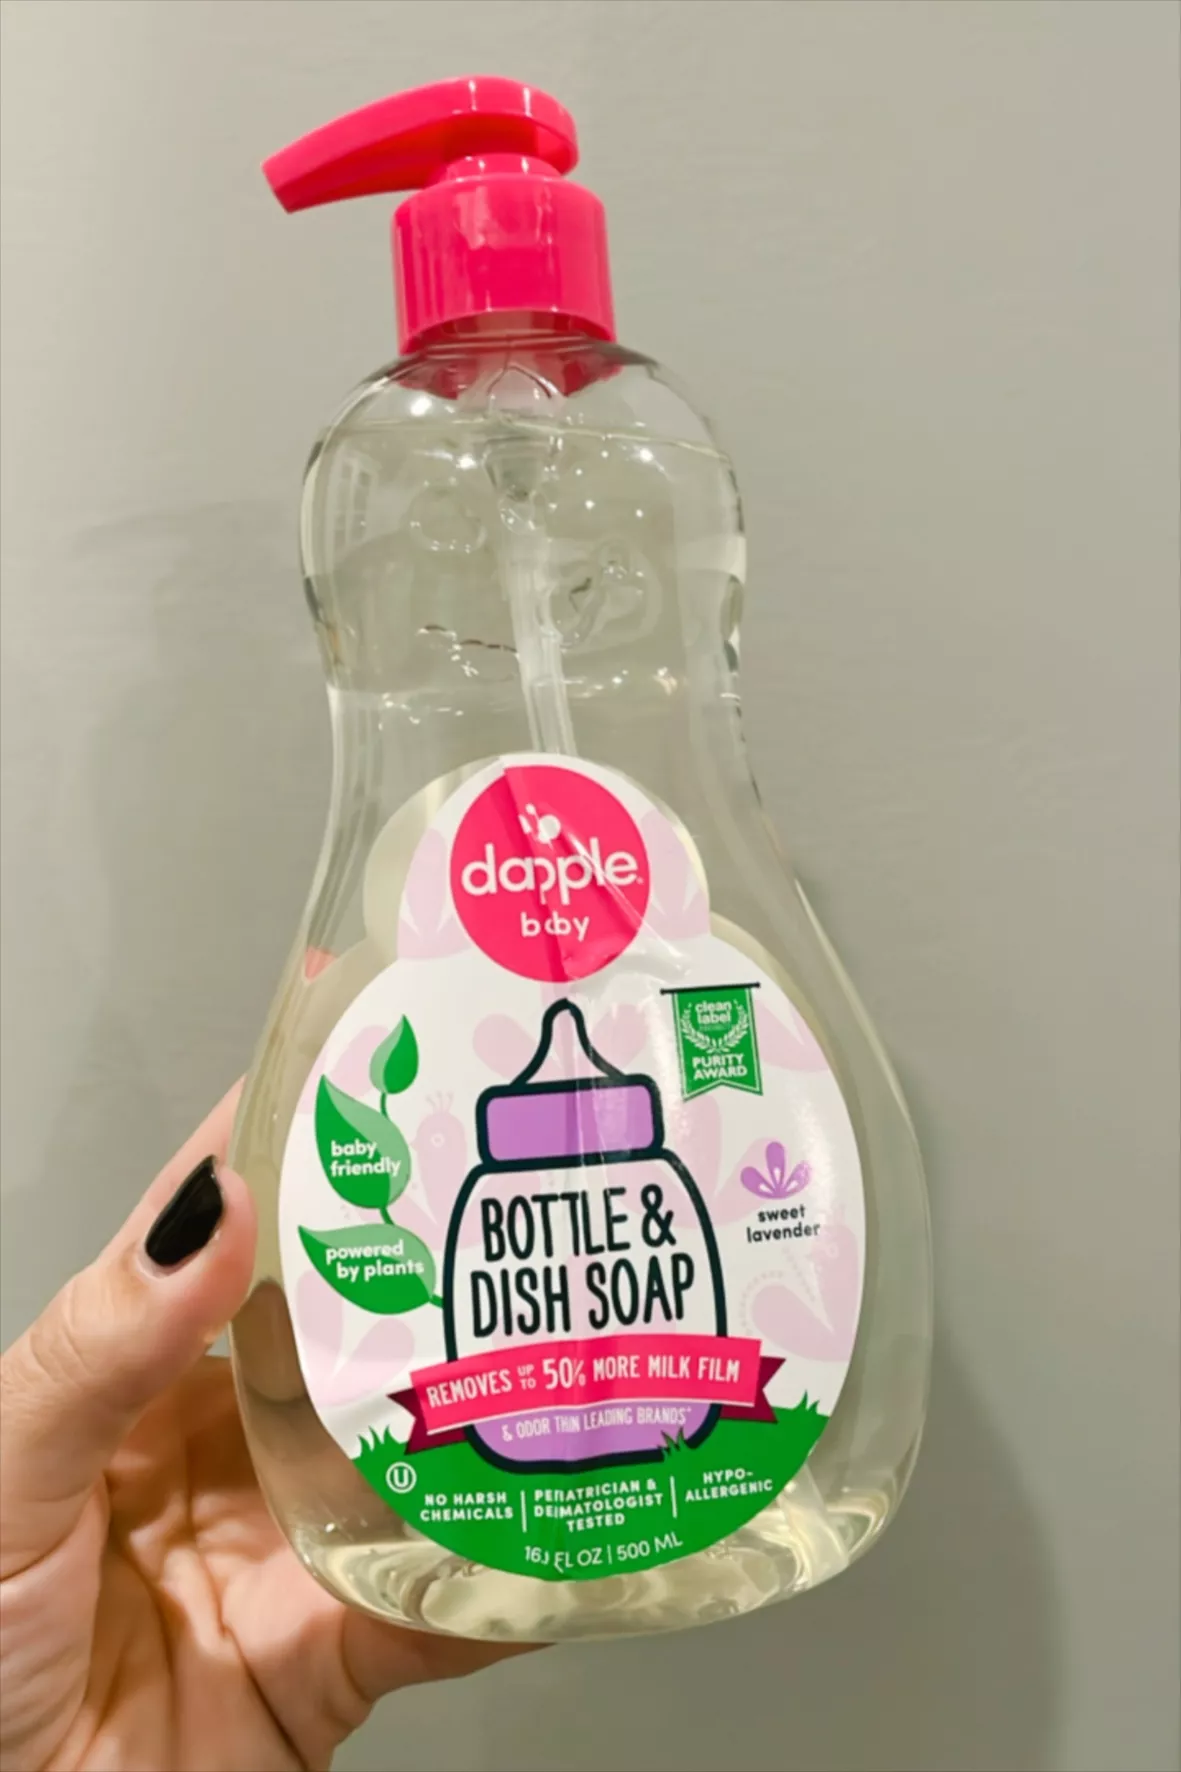 Save on dapple Baby Bottle & Dish Soap Refill Fragrance Free Order